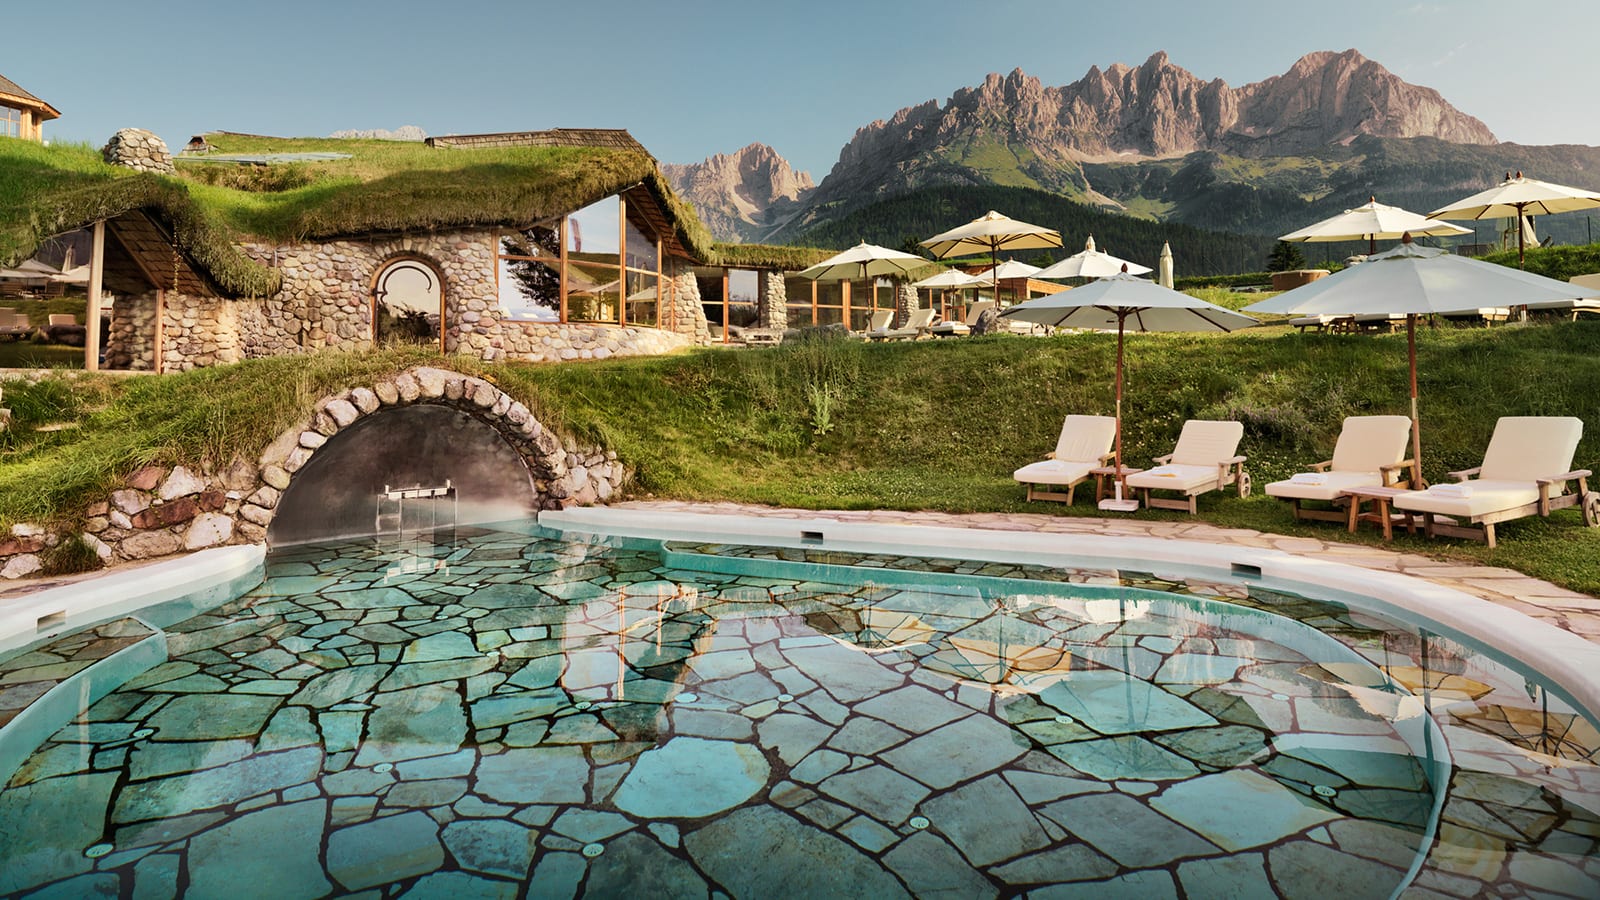 From New Zealand to Peru. Here are 9 of the best spa resorts in the world